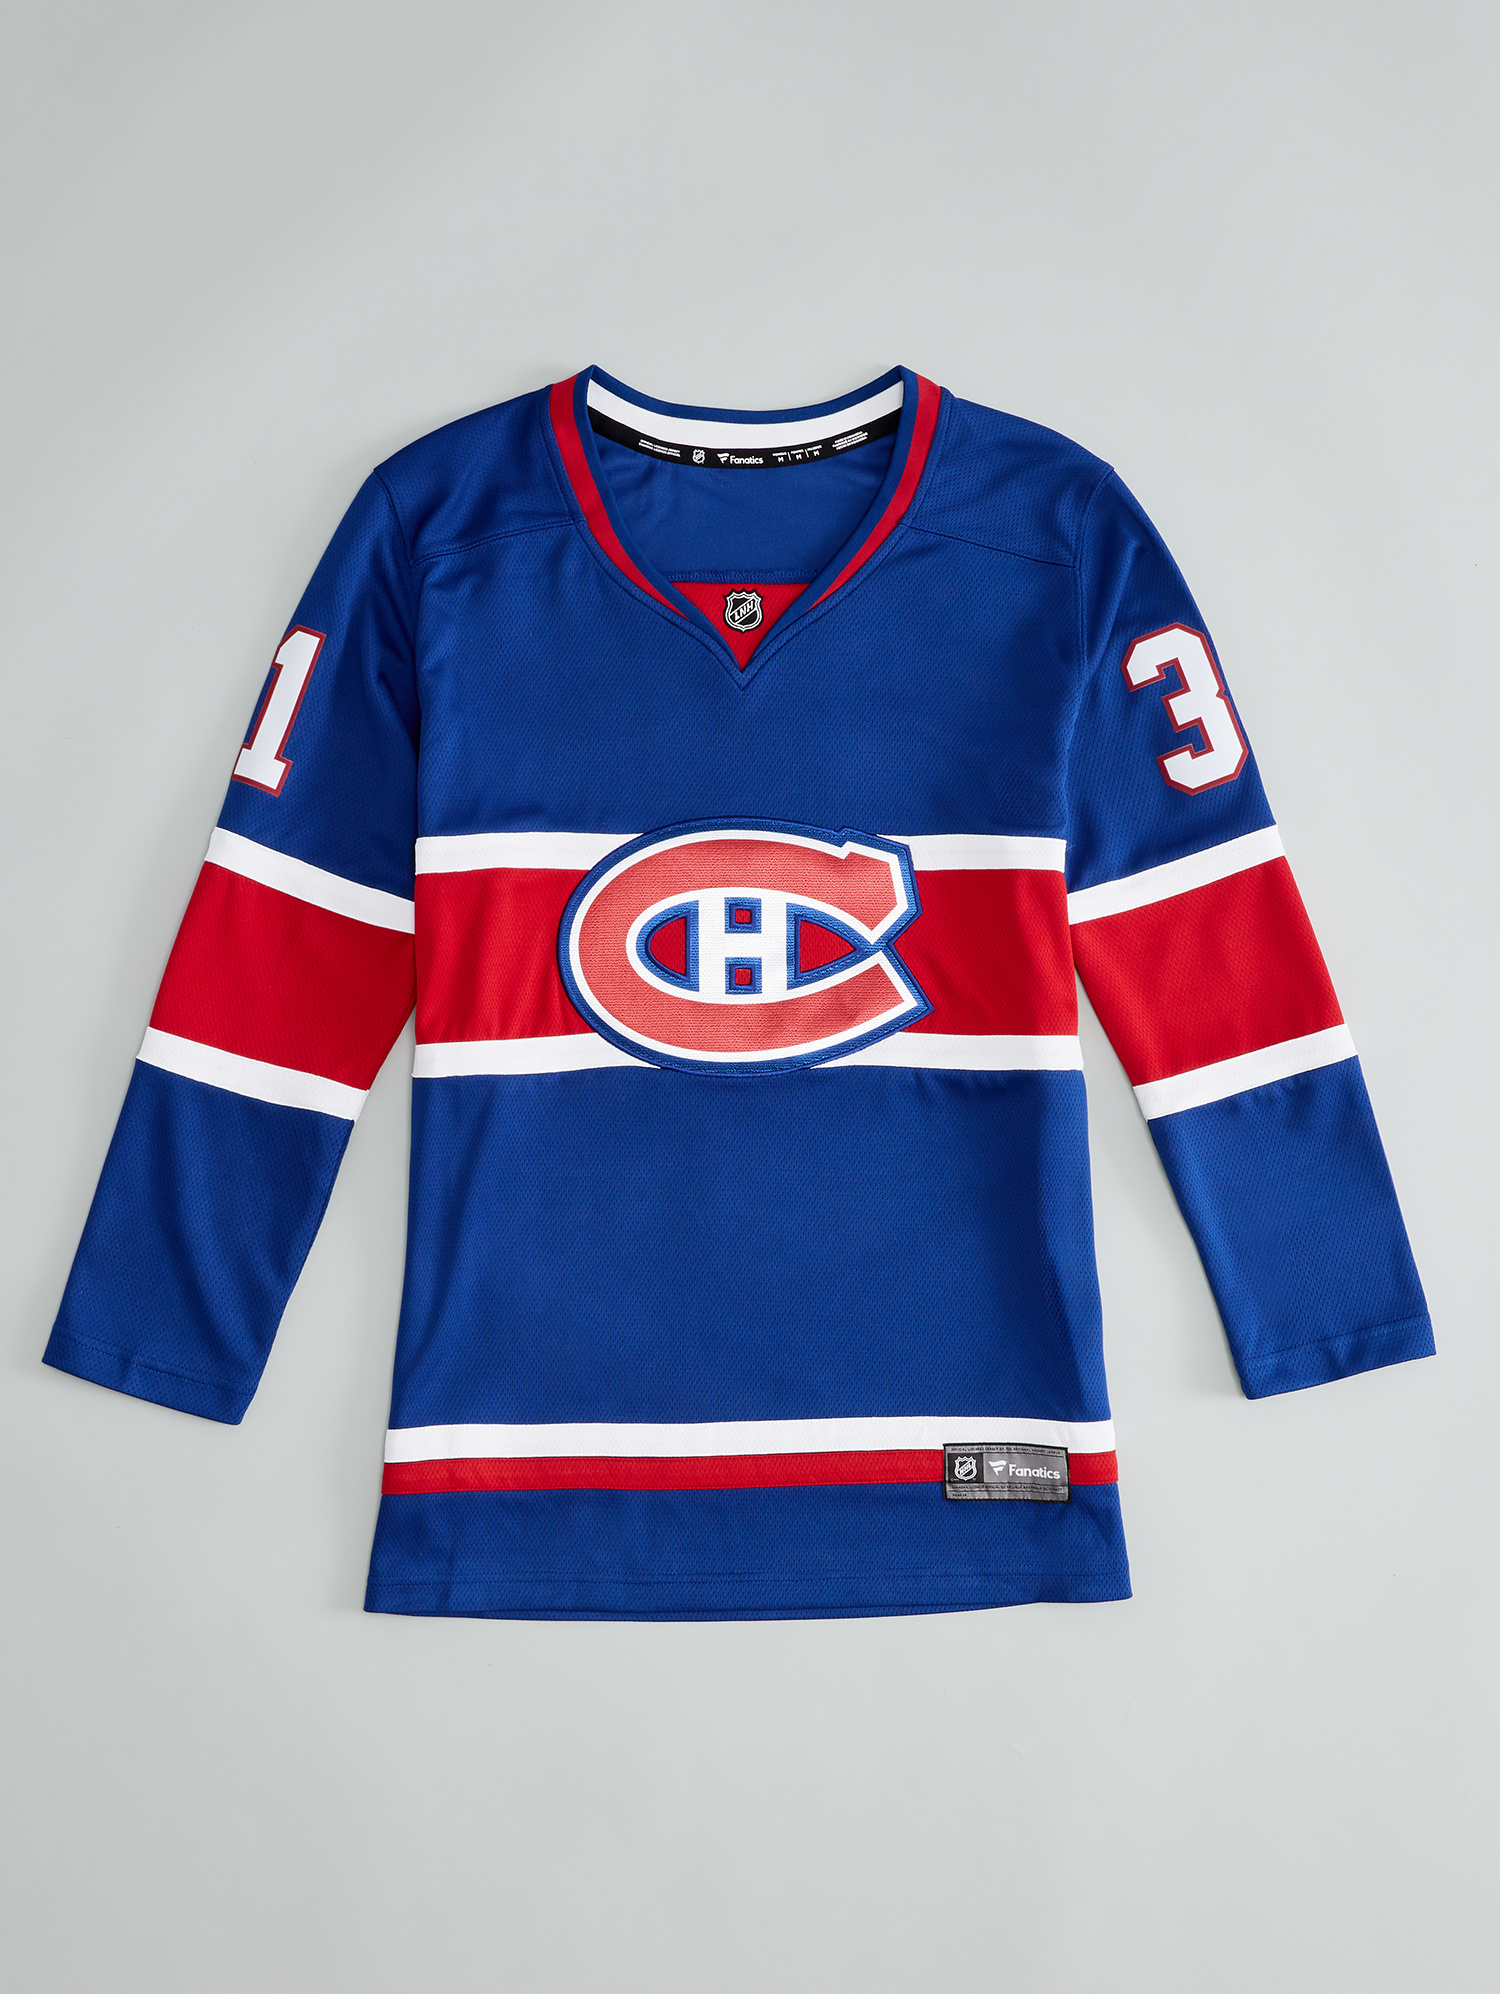 The Jersey History of the Montreal Canadiens 